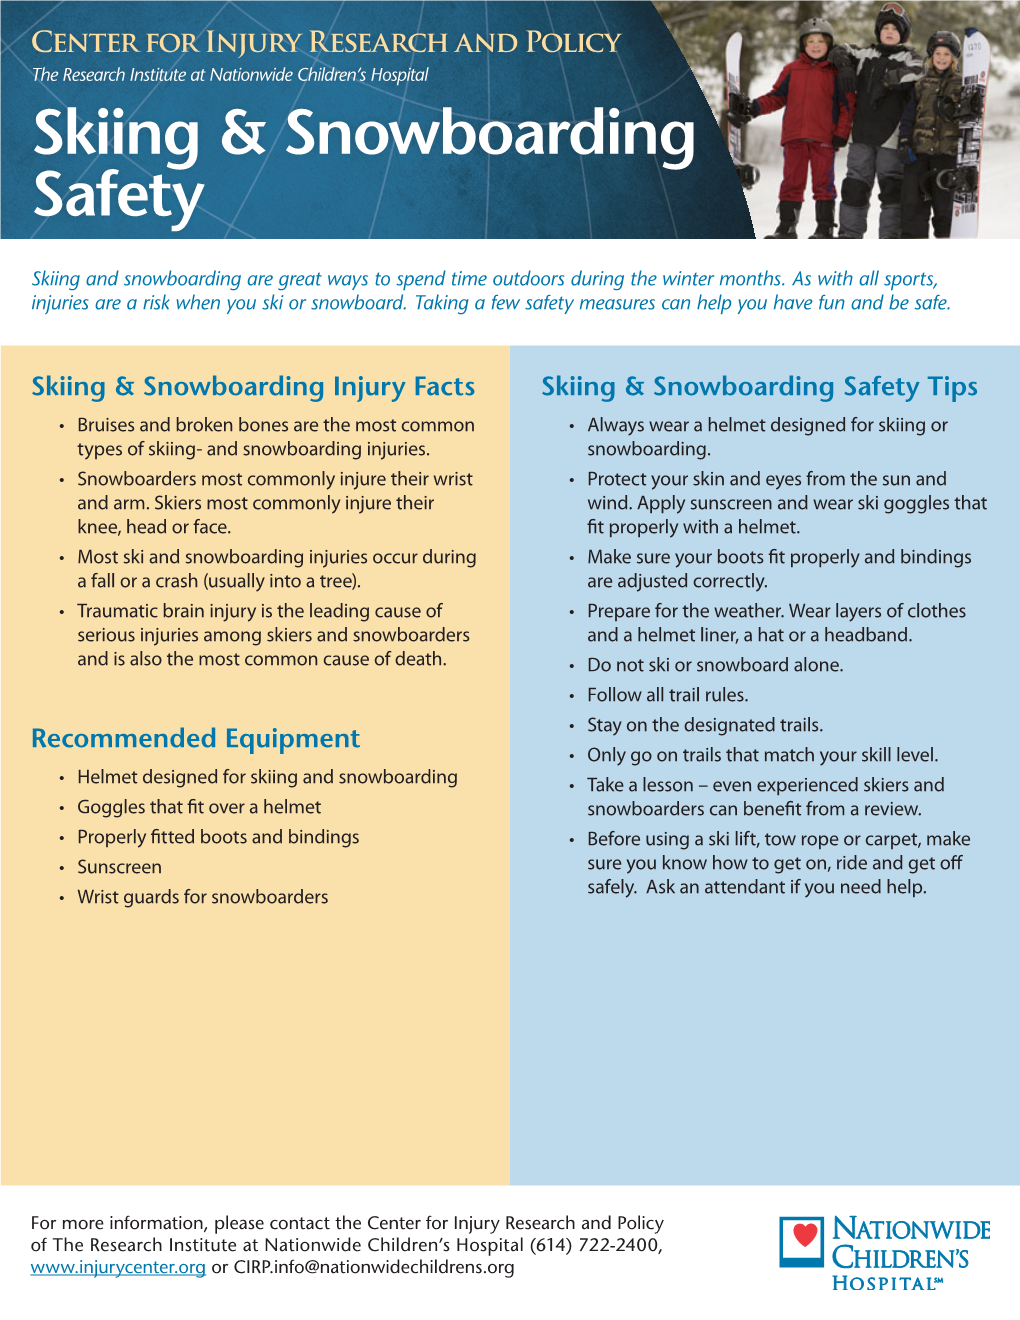 Skiing & Snowboarding Safety